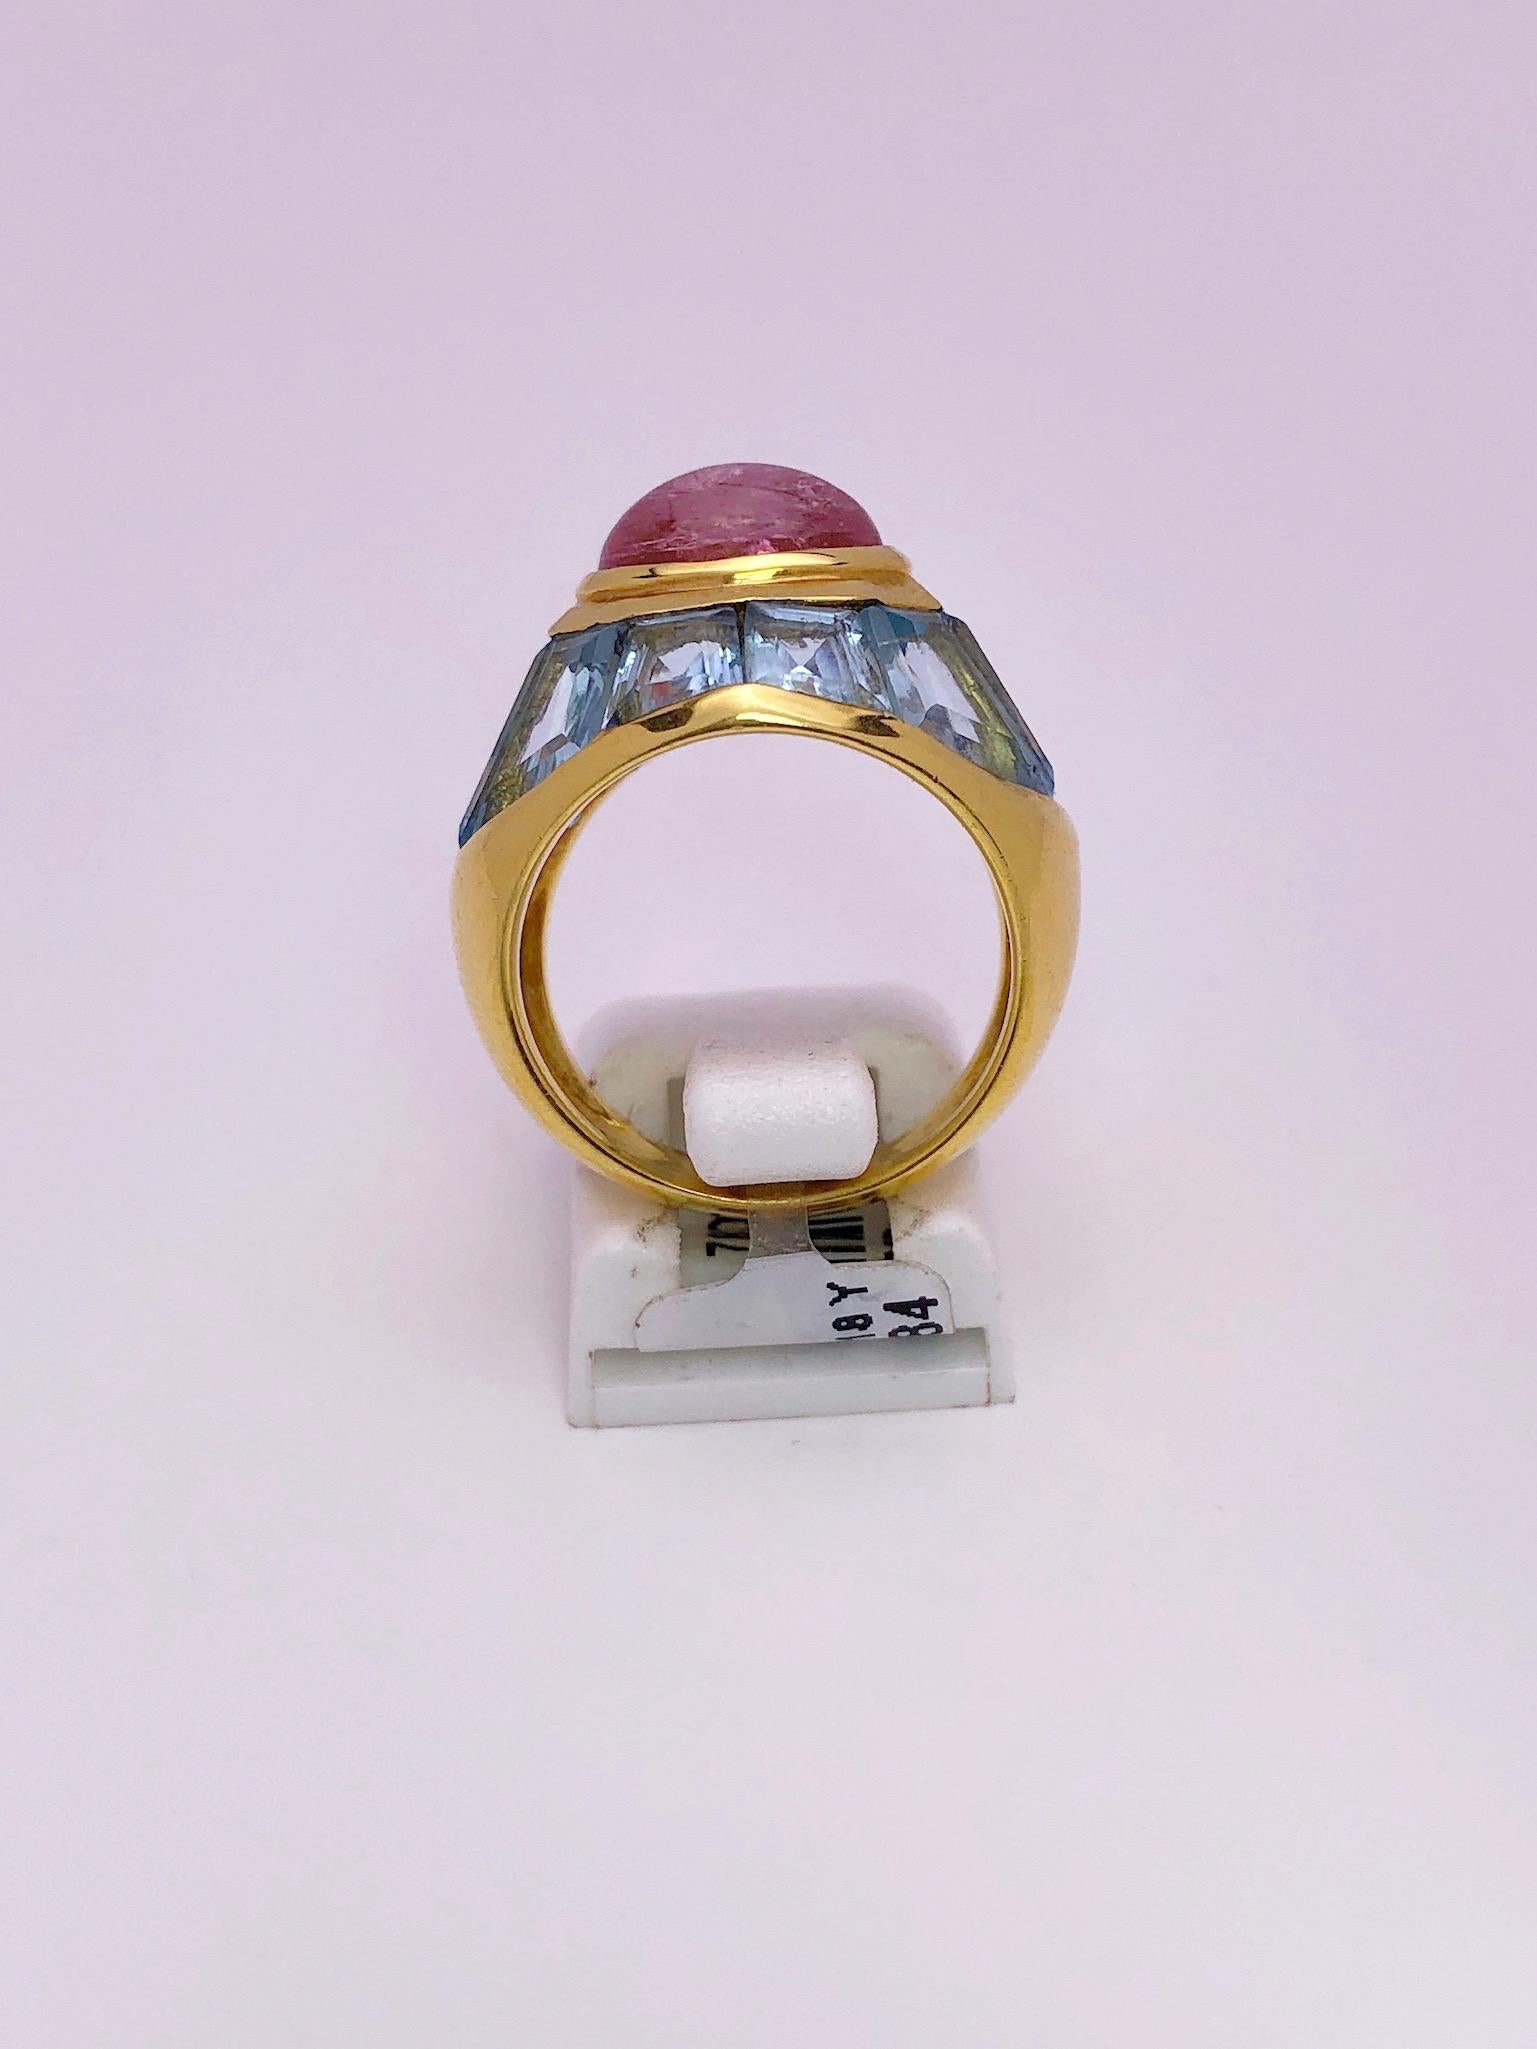 Cabochon Roberto Legnazzi 18 Karat Yellow Gold Ring with Pink Tourmaline and Blue Topaz For Sale